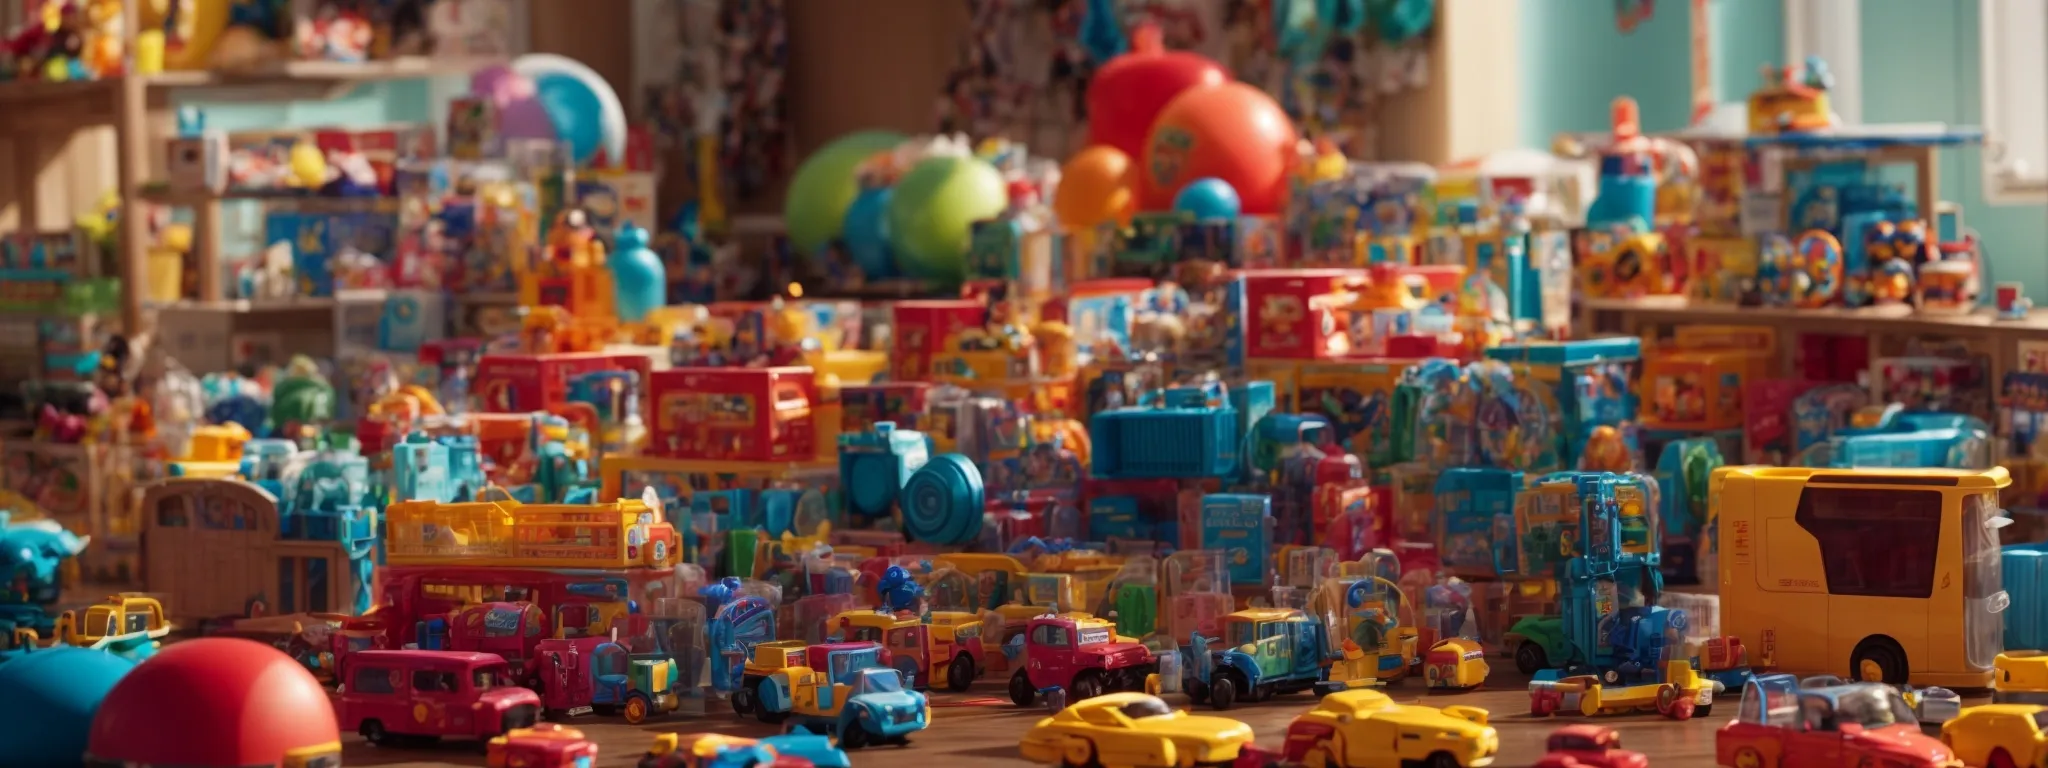 a bright, colorful assortment of various toys thoughtfully displayed on a clean website layout.